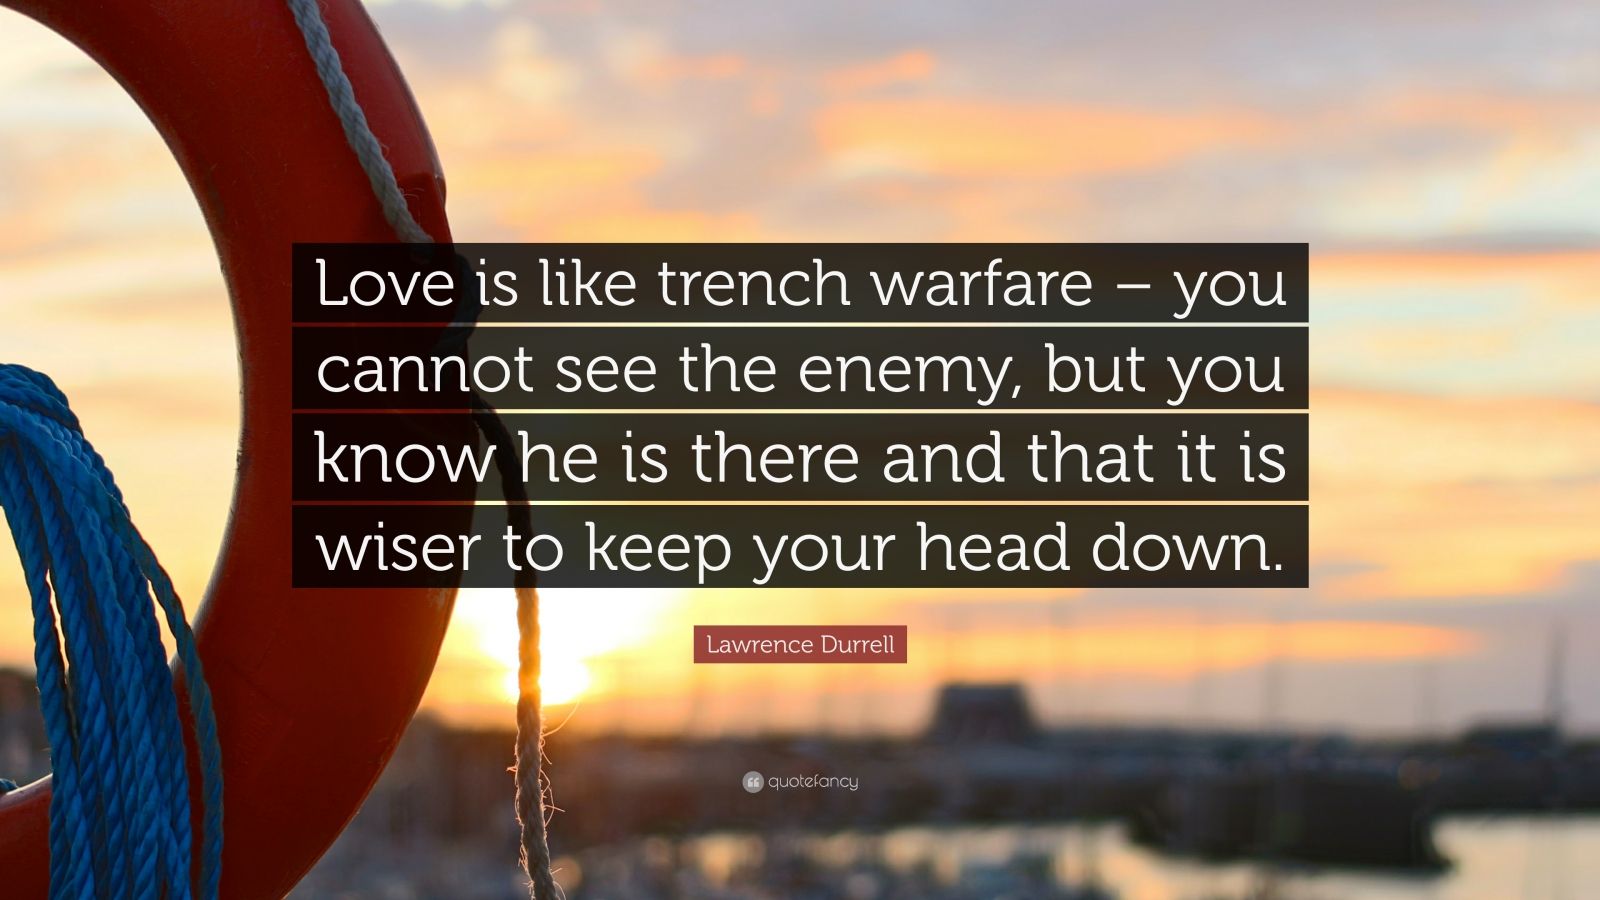 Lawrence Durrell Quote Love Is Like Trench Warfare You Cannot See The Enemy But You Know He